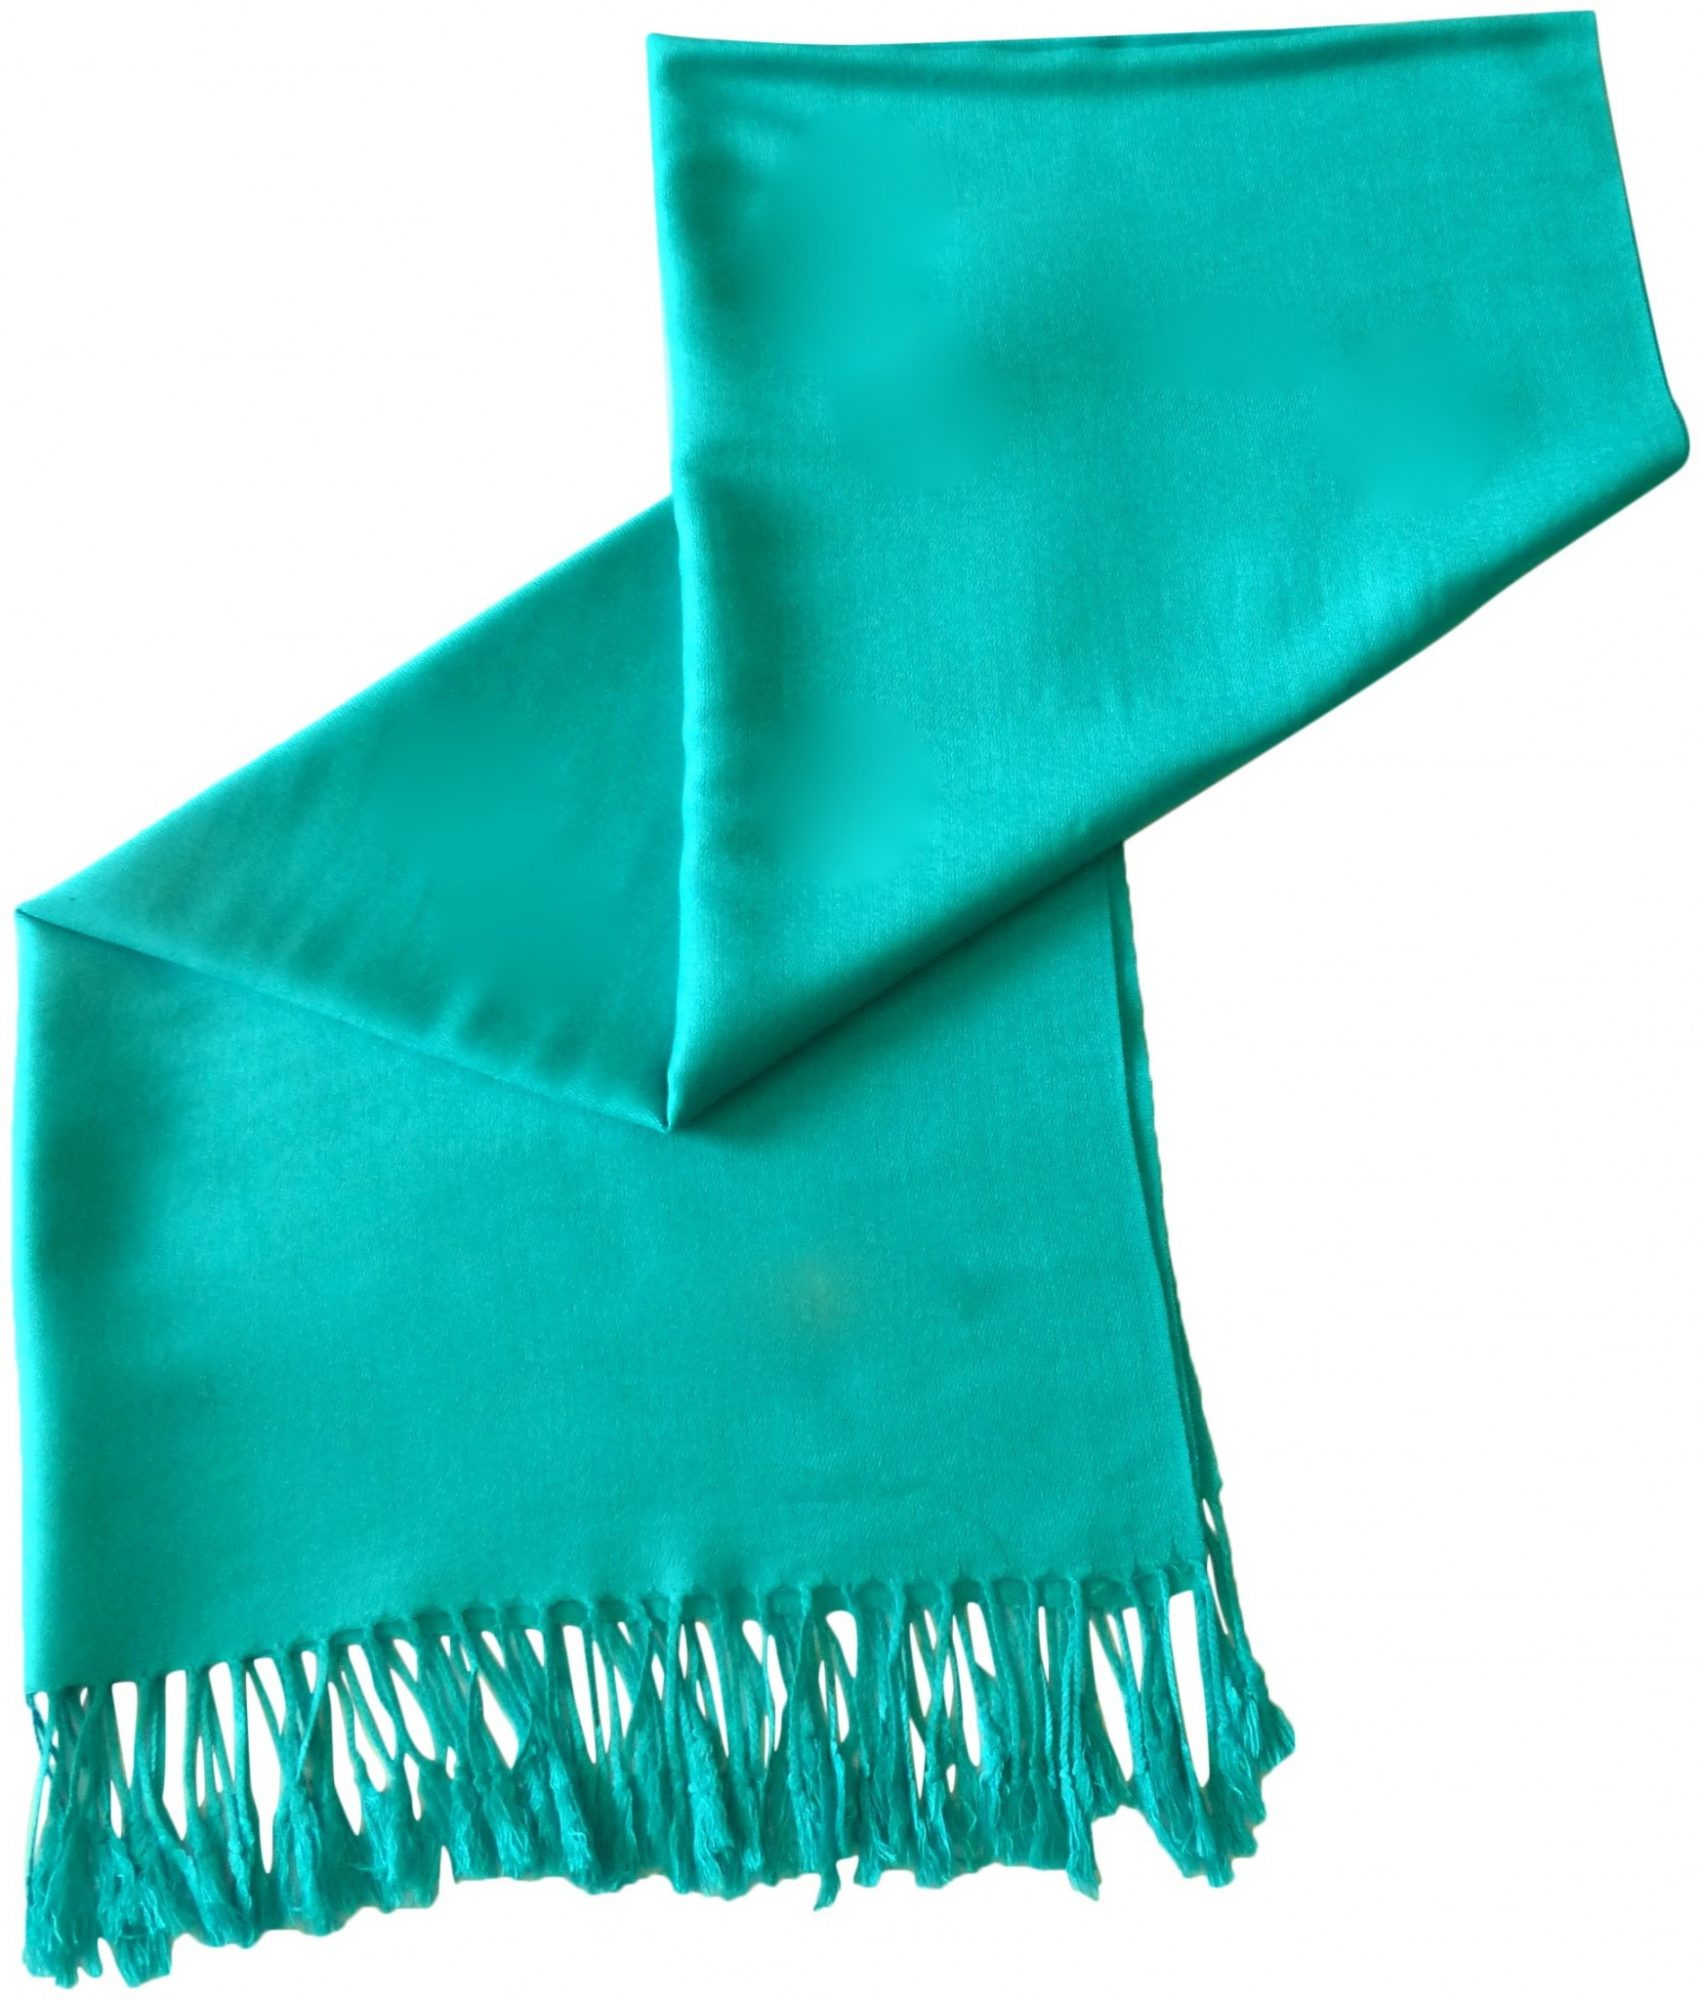 Blue Green Solid Color Design Pashmina Shawl Scarf Wrap Pashminas Shawls NEW a1010-172